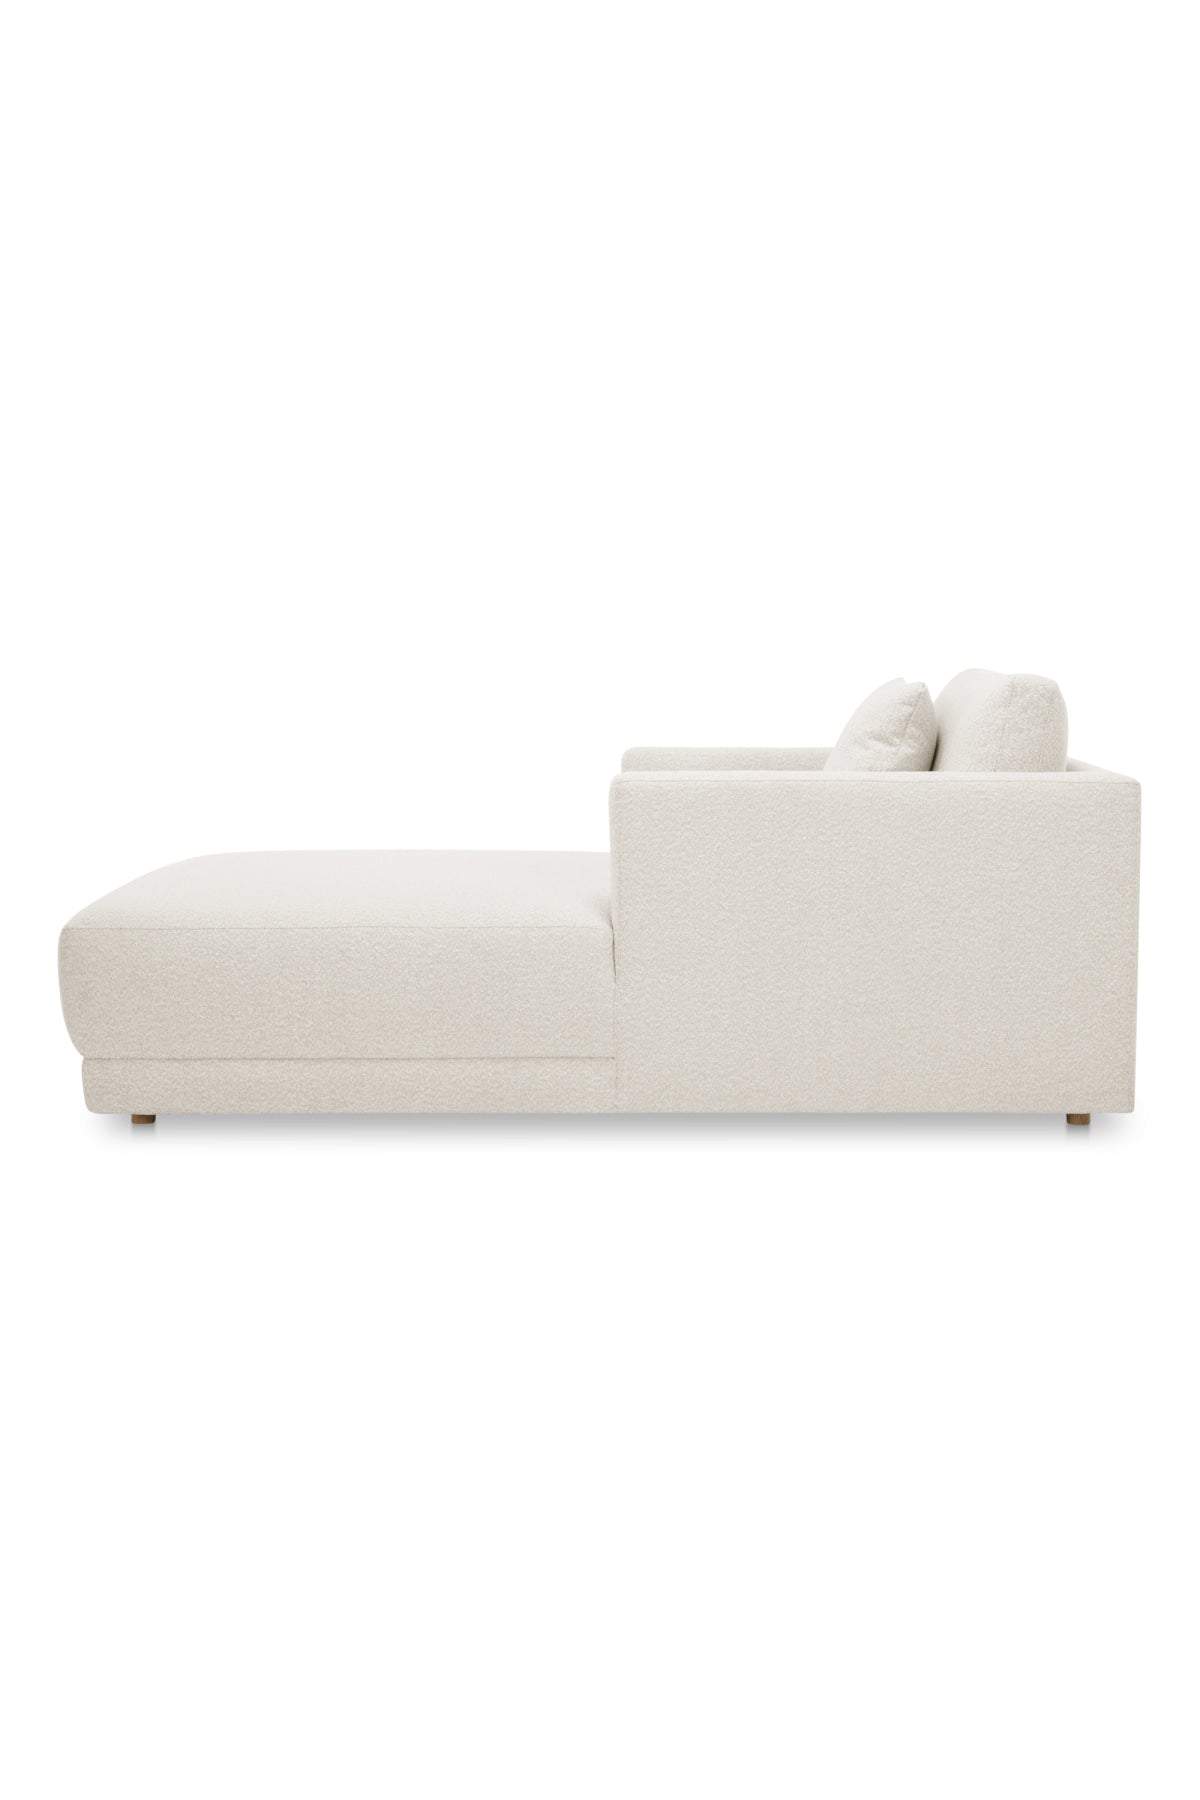 Stacatto Chaise